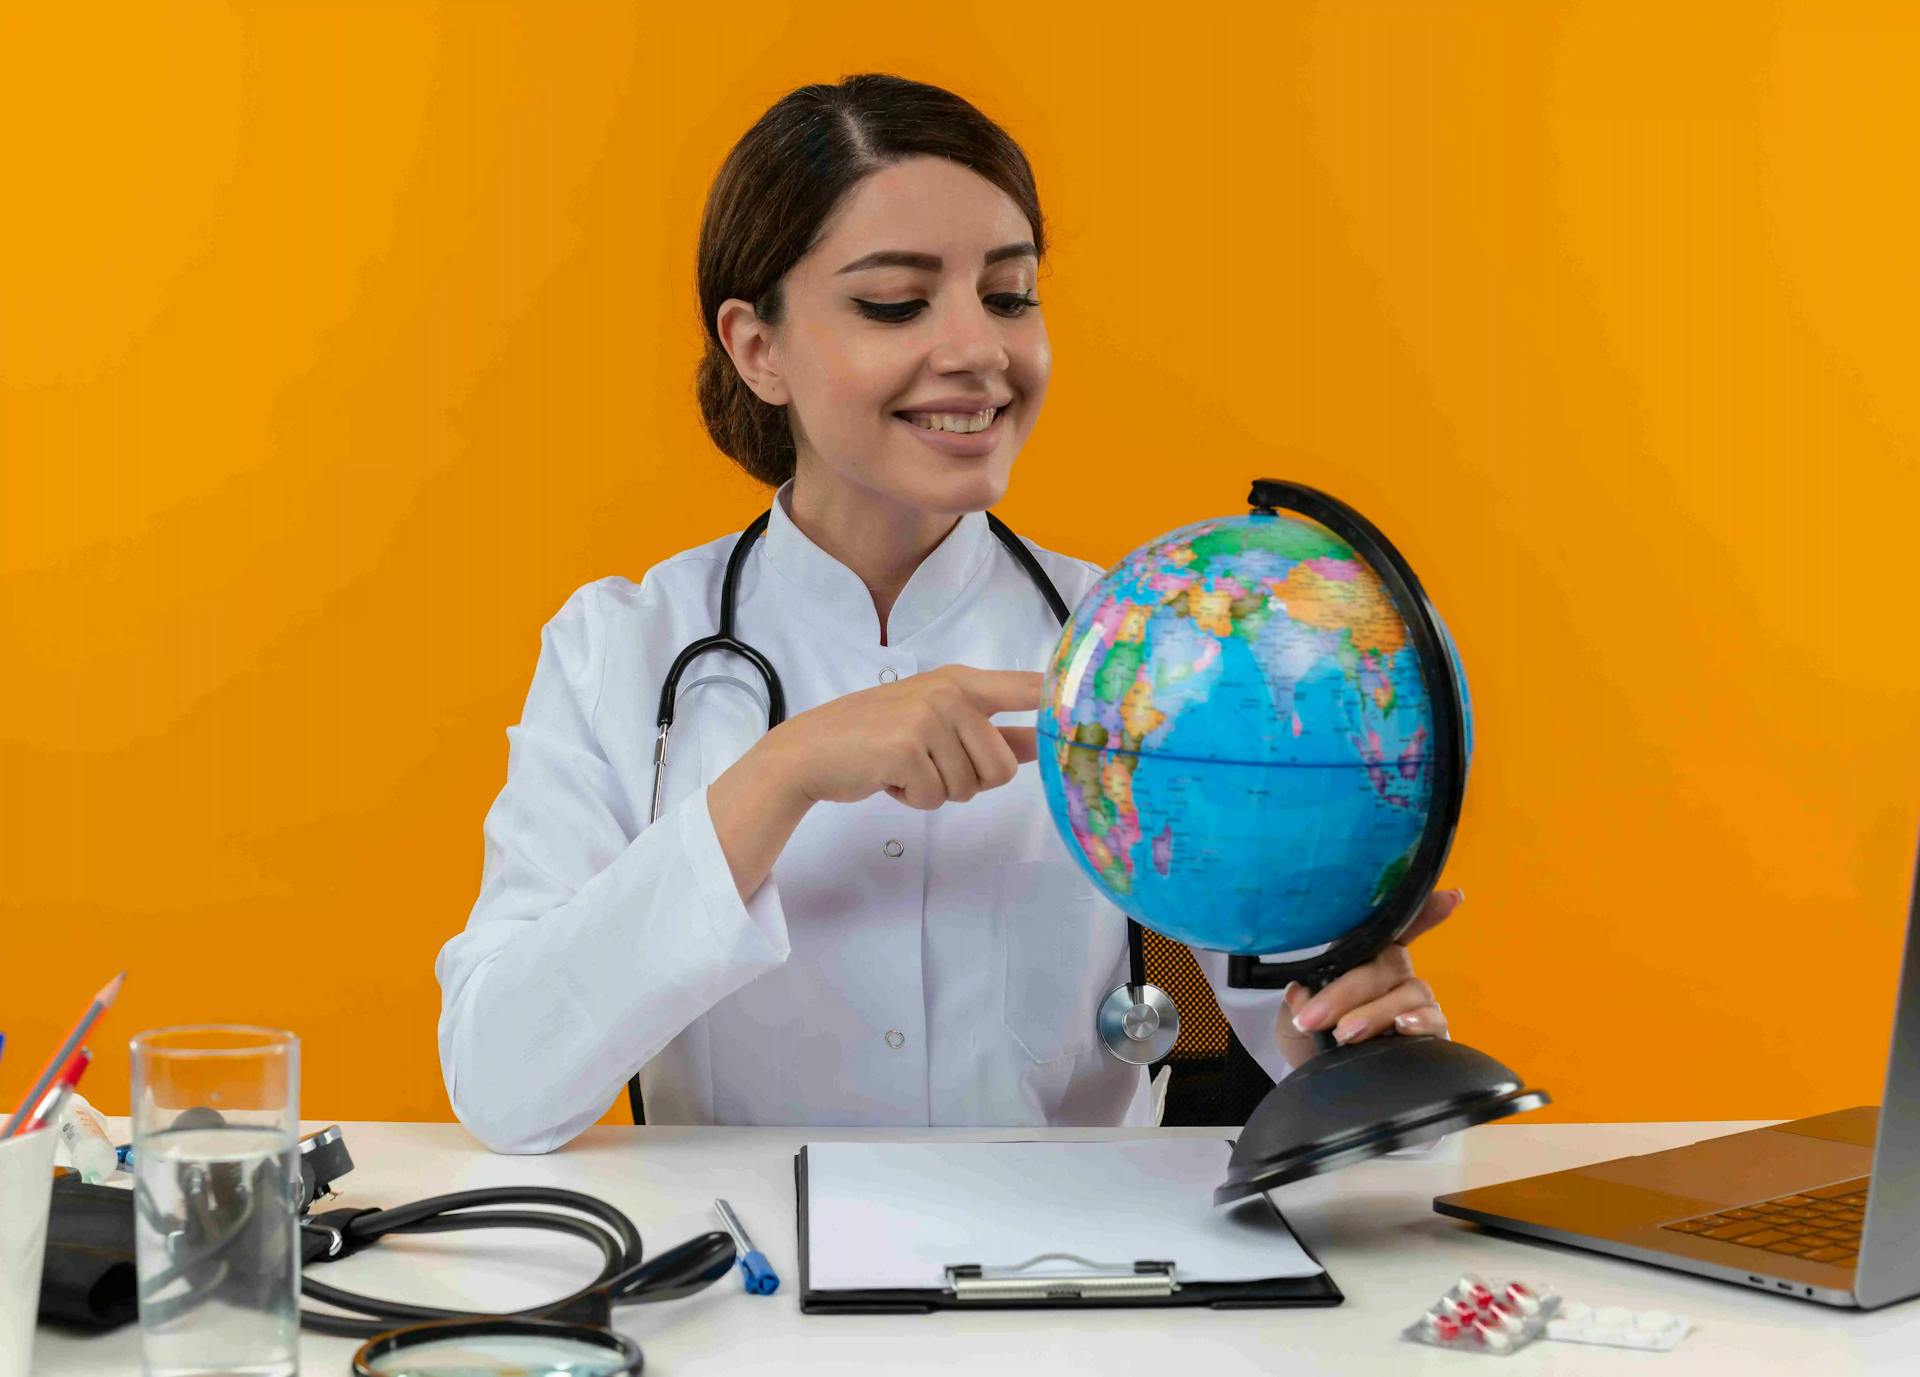 https://strapiassetsprod.s3.amazonaws.com/smiling_young_female_doctor_wearing_medical_robe_stethoscope_sitting_desk_with_medical_tools_laptop_holding_looking_pointing_finger_globe_isolated_yellow_wall_11zon_fcee635d91.webp